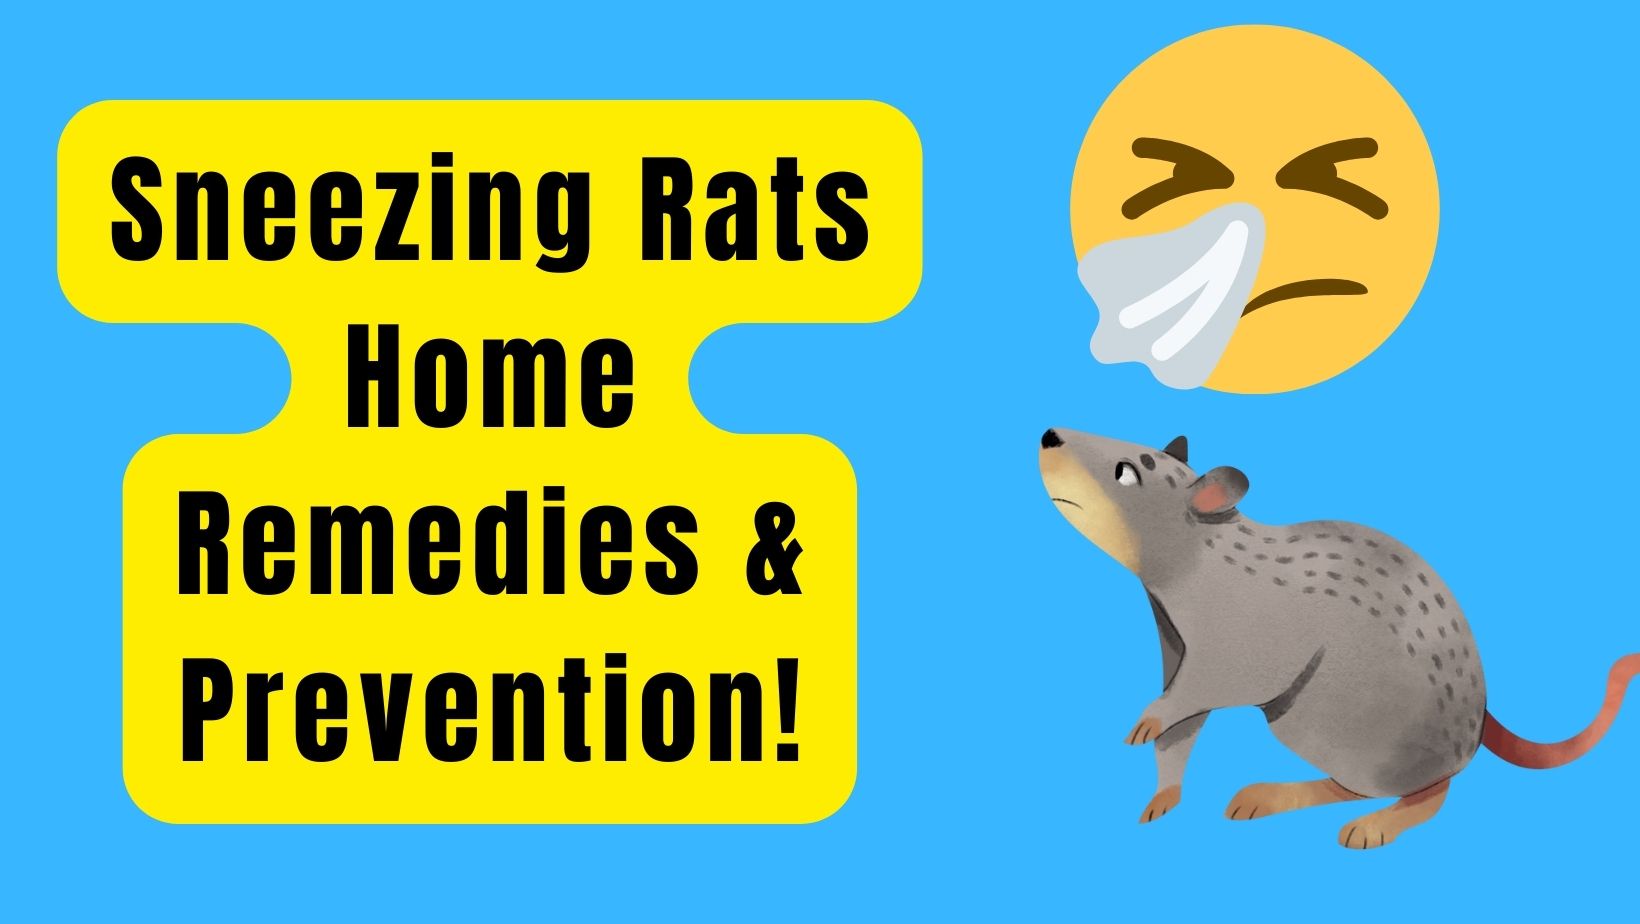 Sneezing Rats Home Remedies – Cure & Prevention!